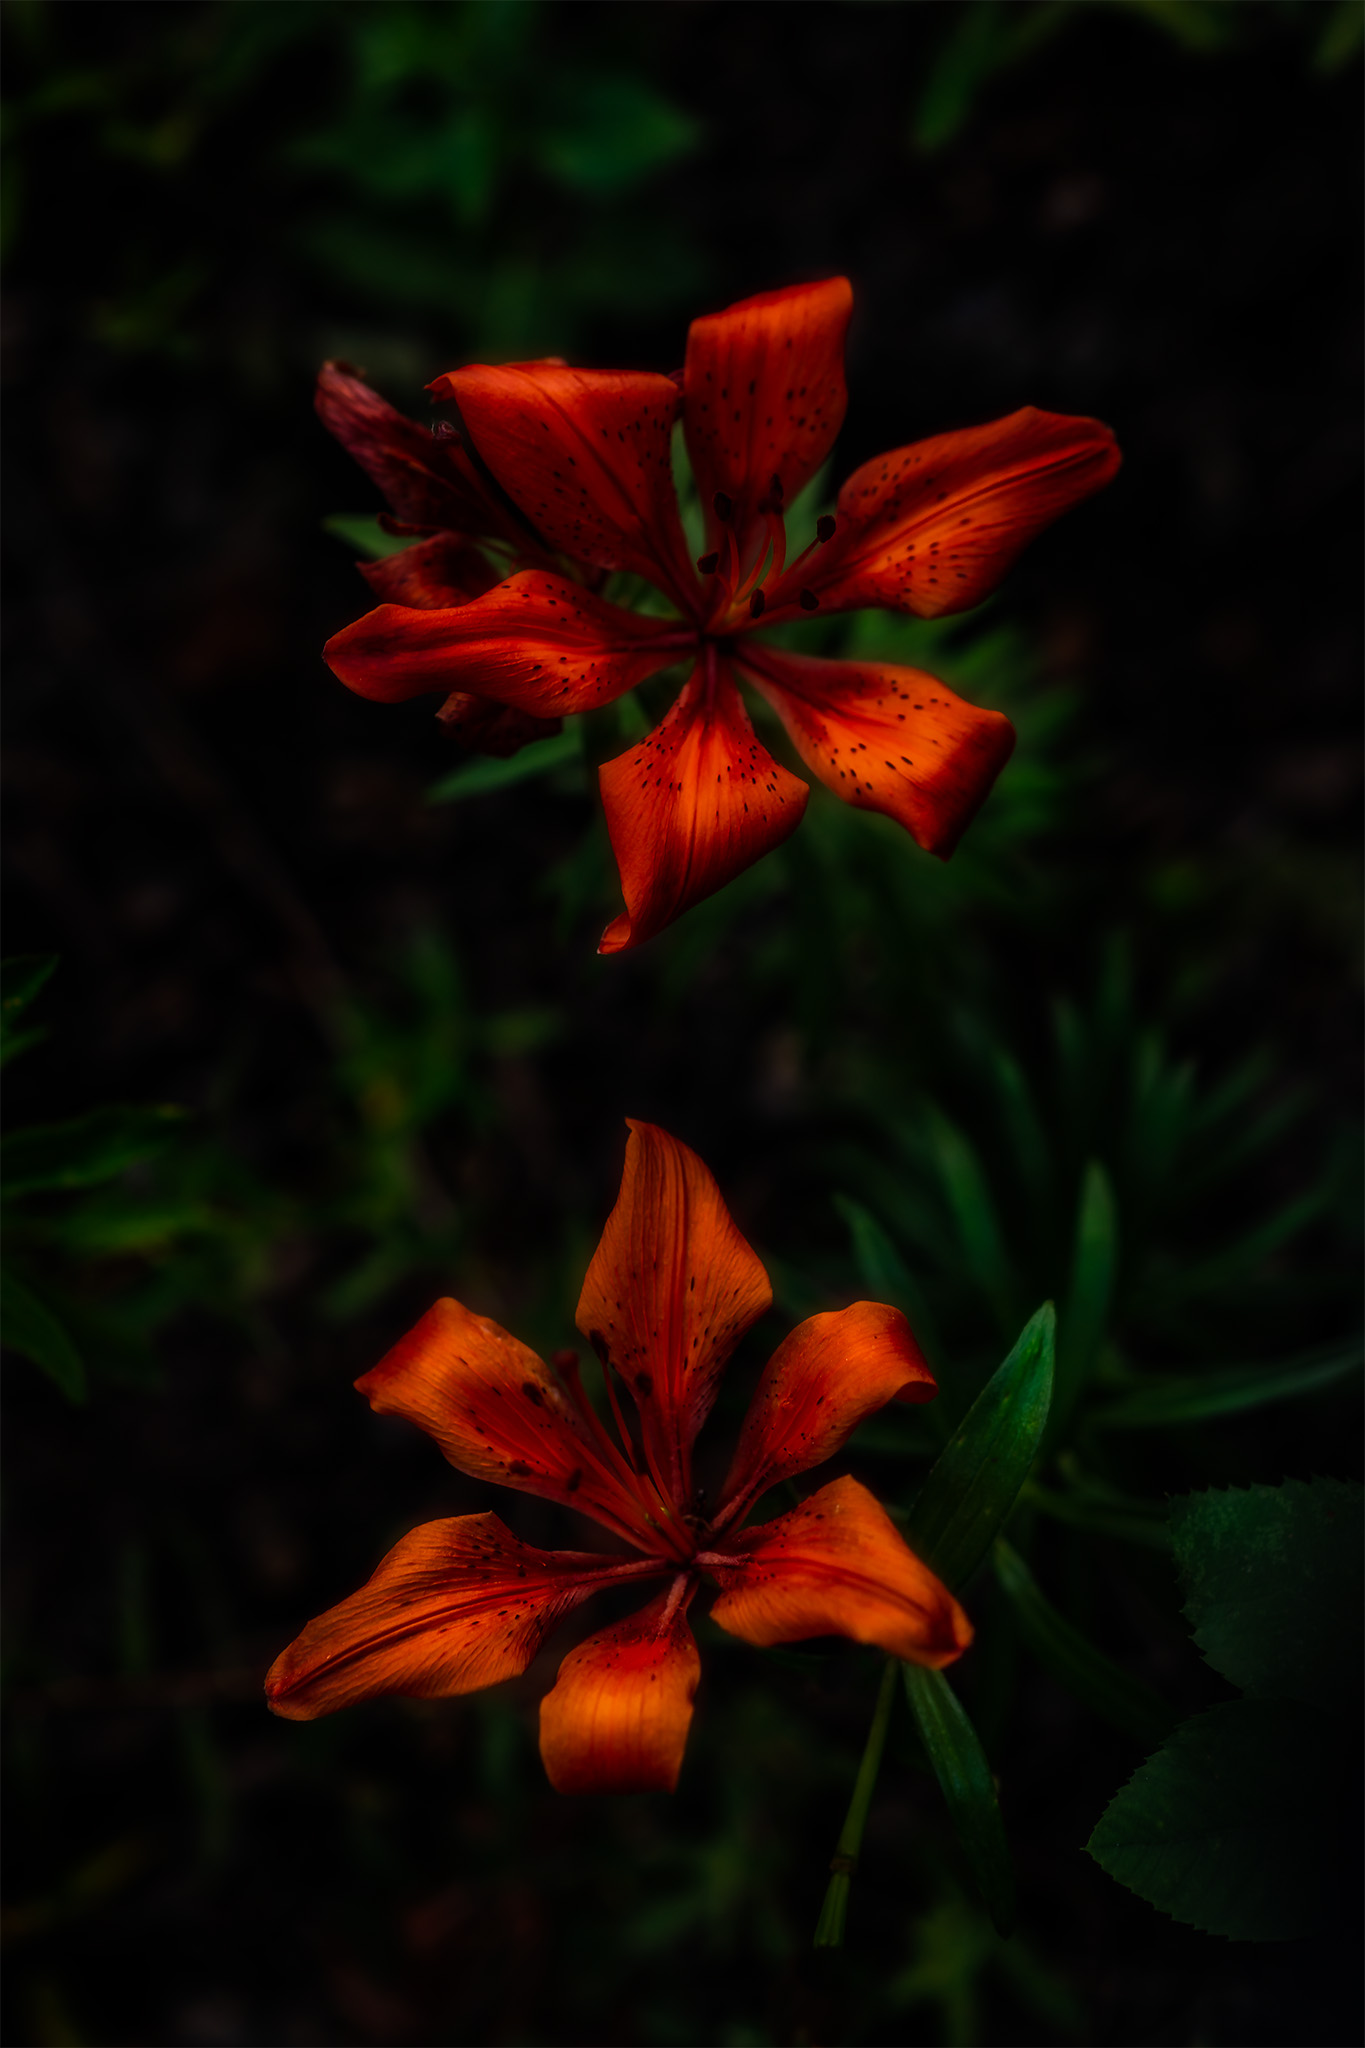 An abstract or close up photograph of a pair of tiger or prairie lillies in Saskatchewan